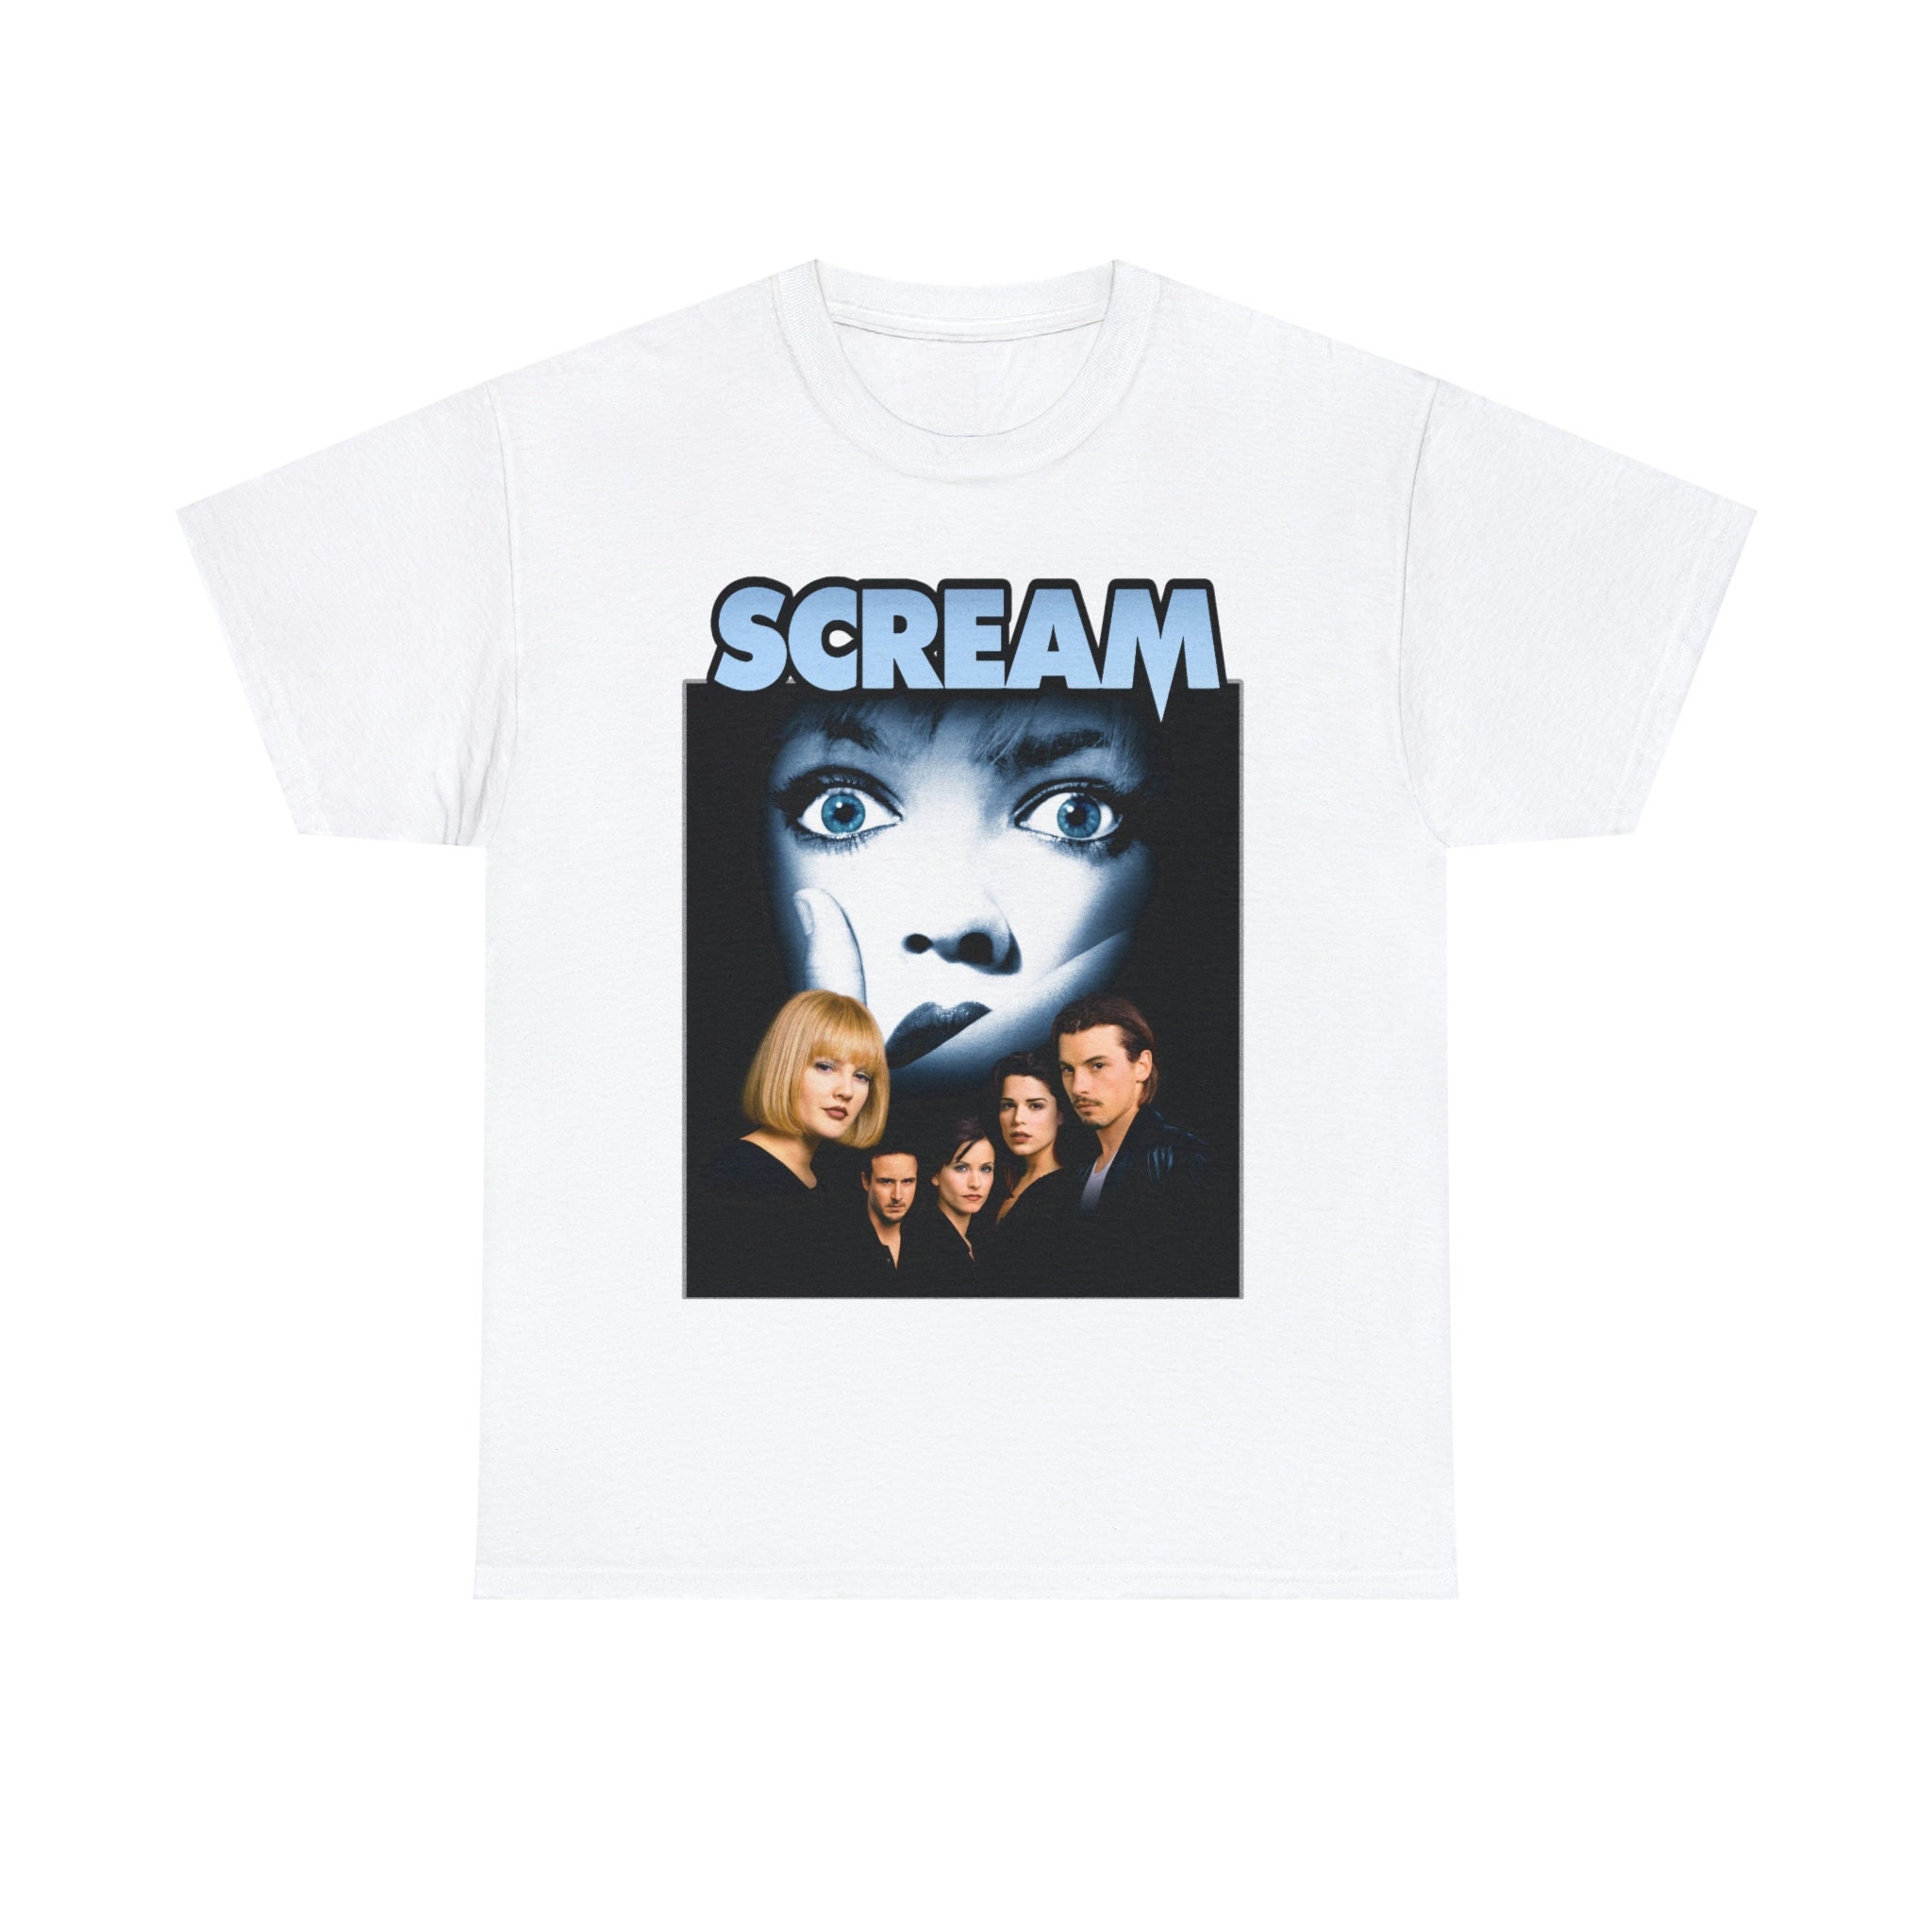 Drew Barrymore SCREAM TShirt, Let's Watch Scary Movie T-Shirt Size S-5XL